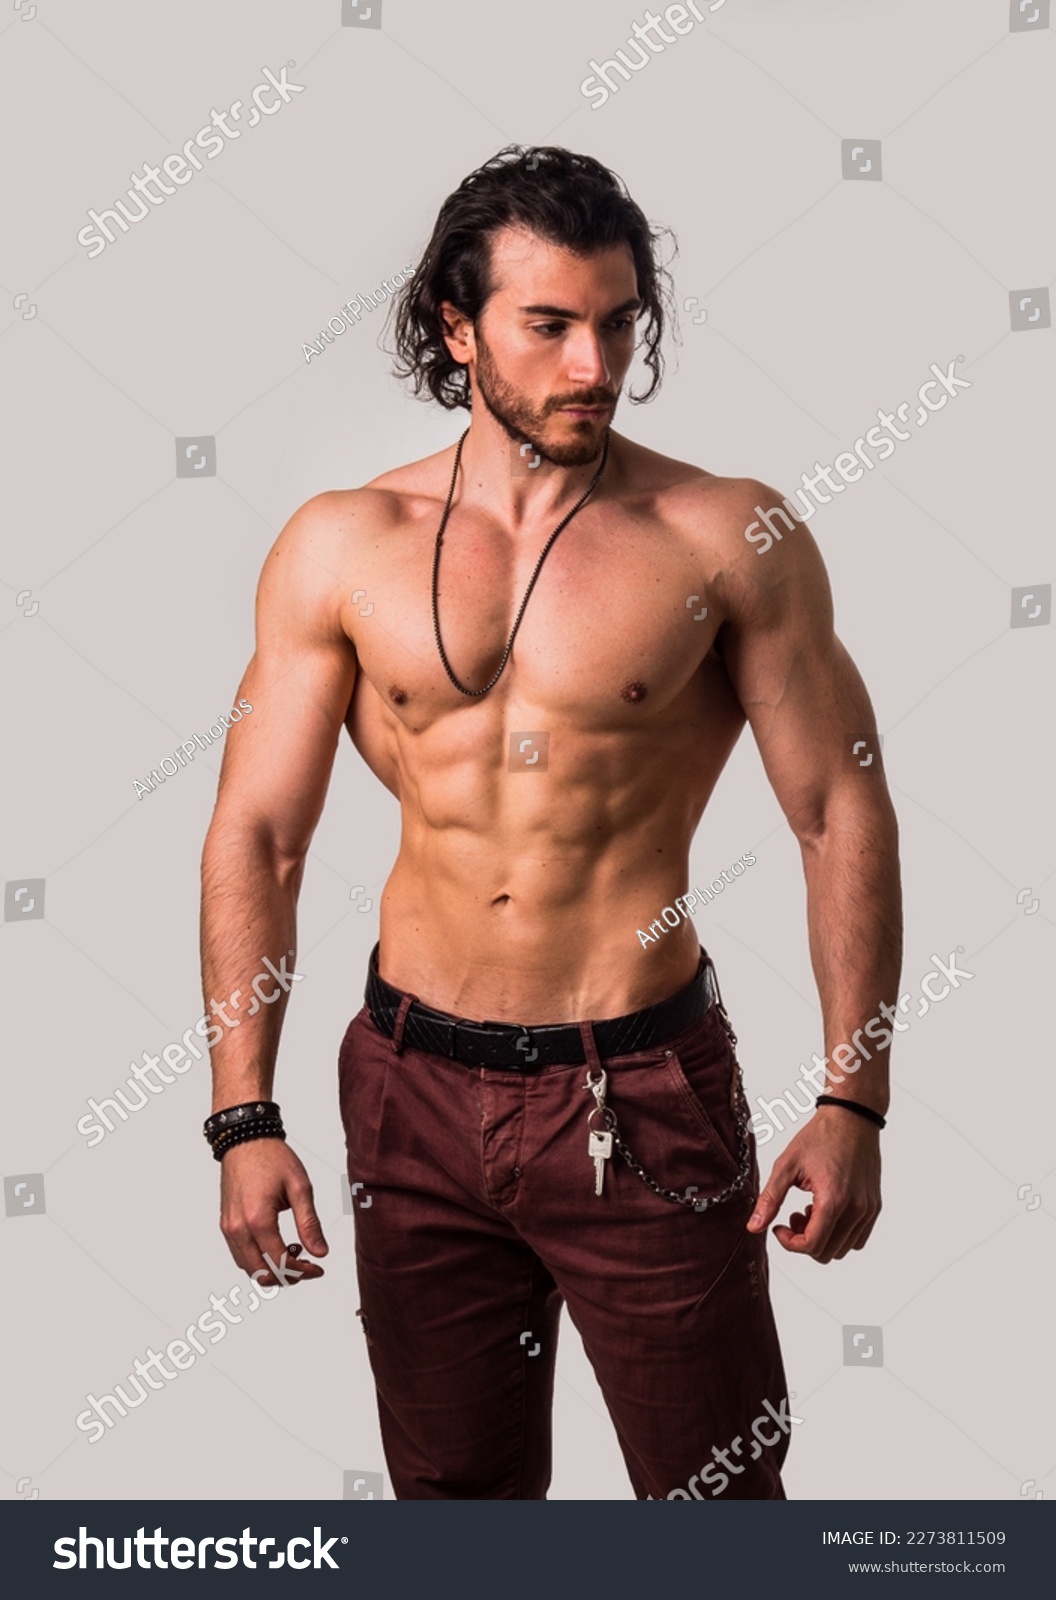 Confident, attractive shirtless muscular young man with open vest on #2273811509